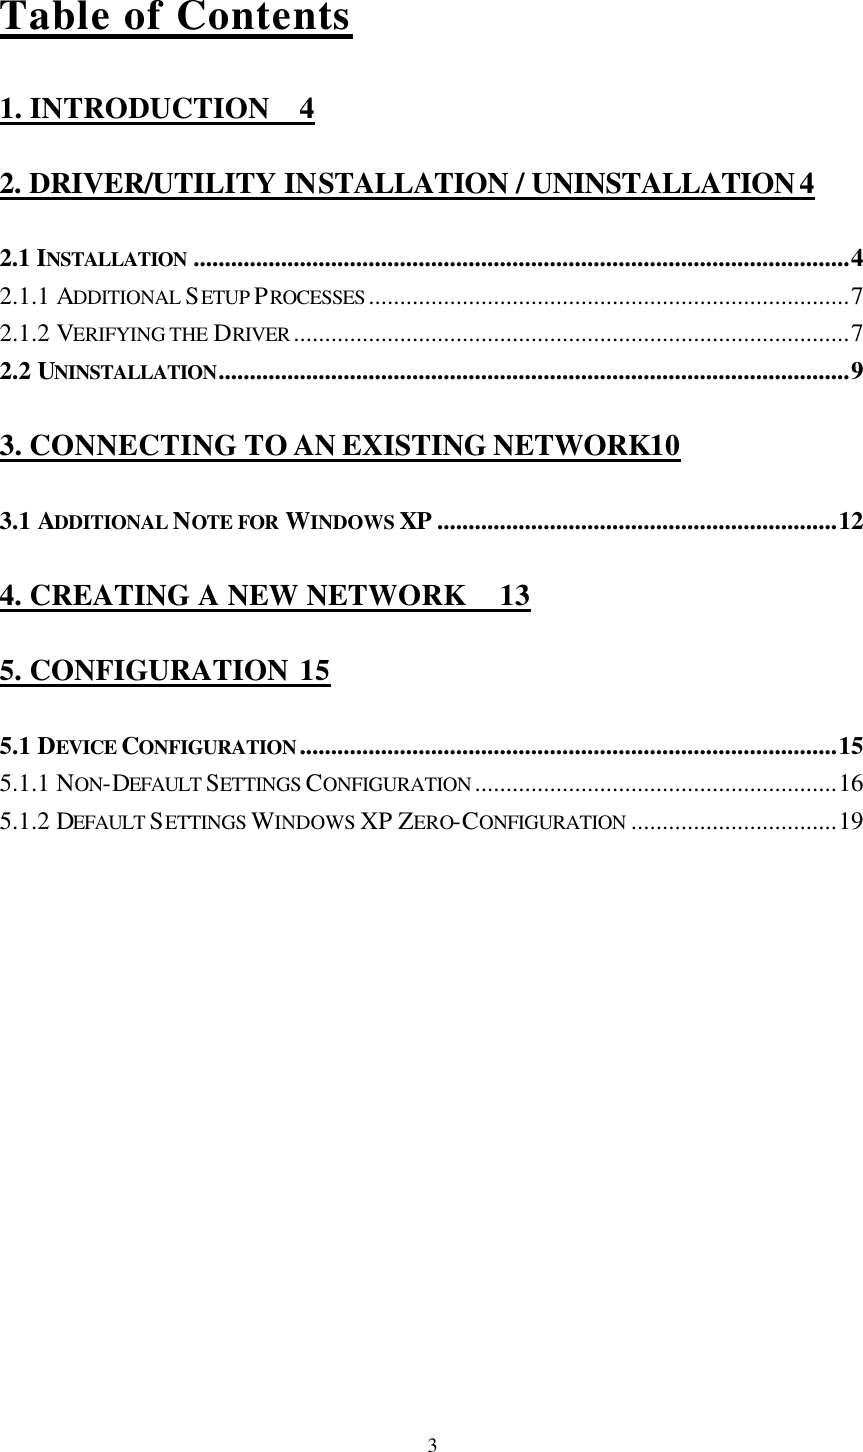  3Table of Contents 1. INTRODUCTION 4 2. DRIVER/UTILITY INSTALLATION / UNINSTALLATION 4 2.1 INSTALLATION .........................................................................................................4 2.1.1 ADDITIONAL SETUP PROCESSES .............................................................................7 2.1.2 VERIFYING THE DRIVER .........................................................................................7 2.2 UNINSTALLATION.....................................................................................................9 3. CONNECTING TO AN EXISTING NETWORK10 3.1 ADDITIONAL NOTE FOR WINDOWS XP ................................................................12 4. CREATING A NEW NETWORK 13 5. CONFIGURATION 15 5.1 DEVICE CONFIGURATION......................................................................................15 5.1.1 NON-DEFAULT SETTINGS CONFIGURATION ..........................................................16 5.1.2 DEFAULT SETTINGS WINDOWS XP ZERO-CONFIGURATION .................................19 